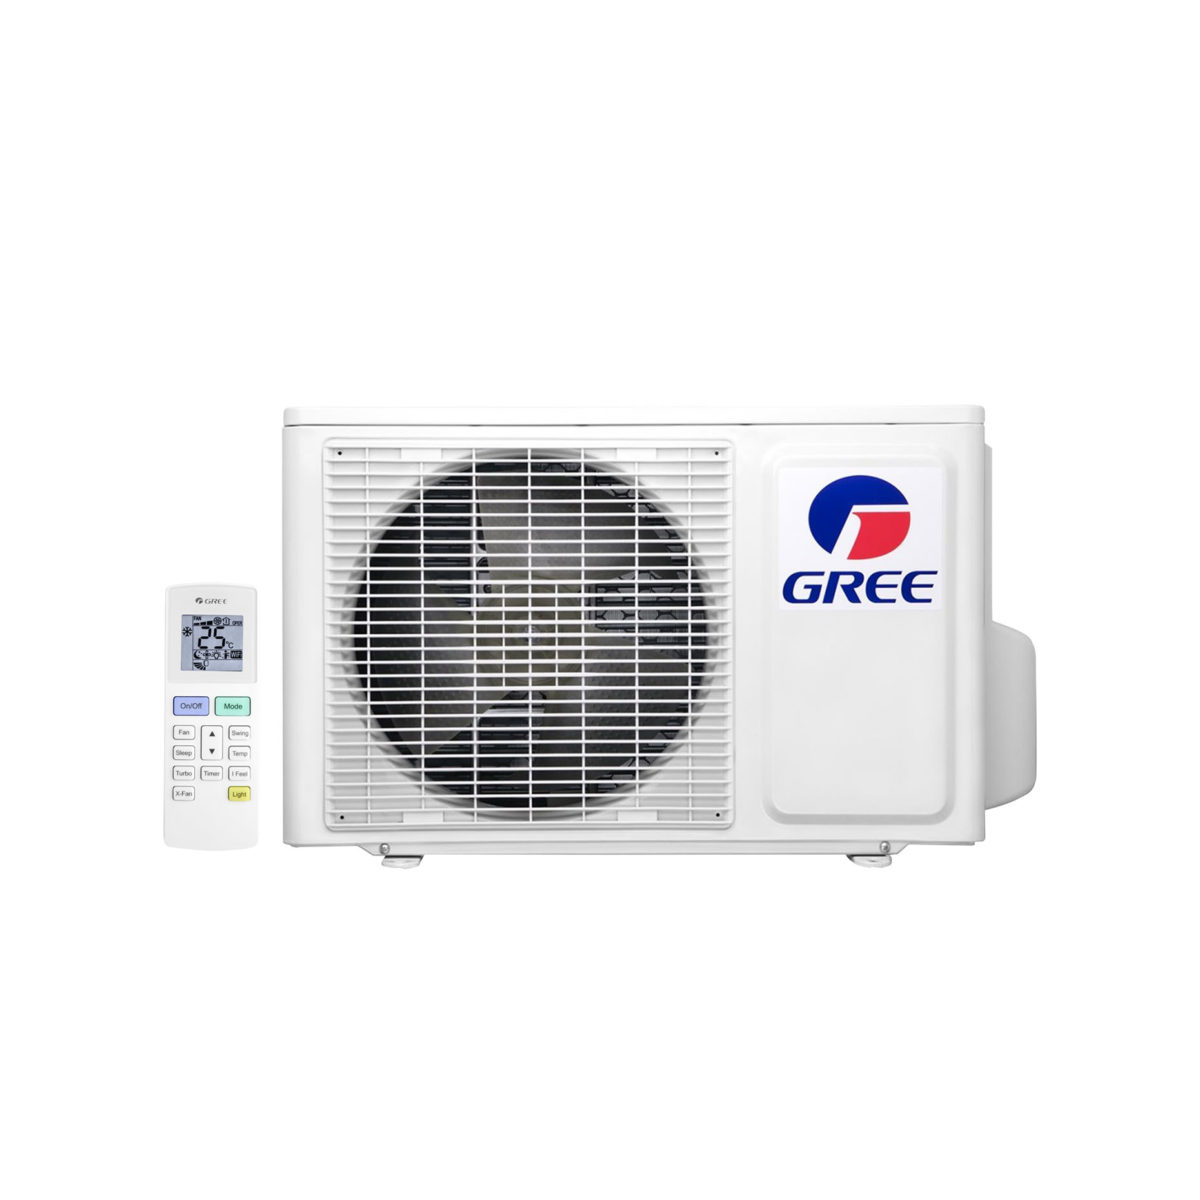 GREE_R410a_AC_OUTDOOR and Remote